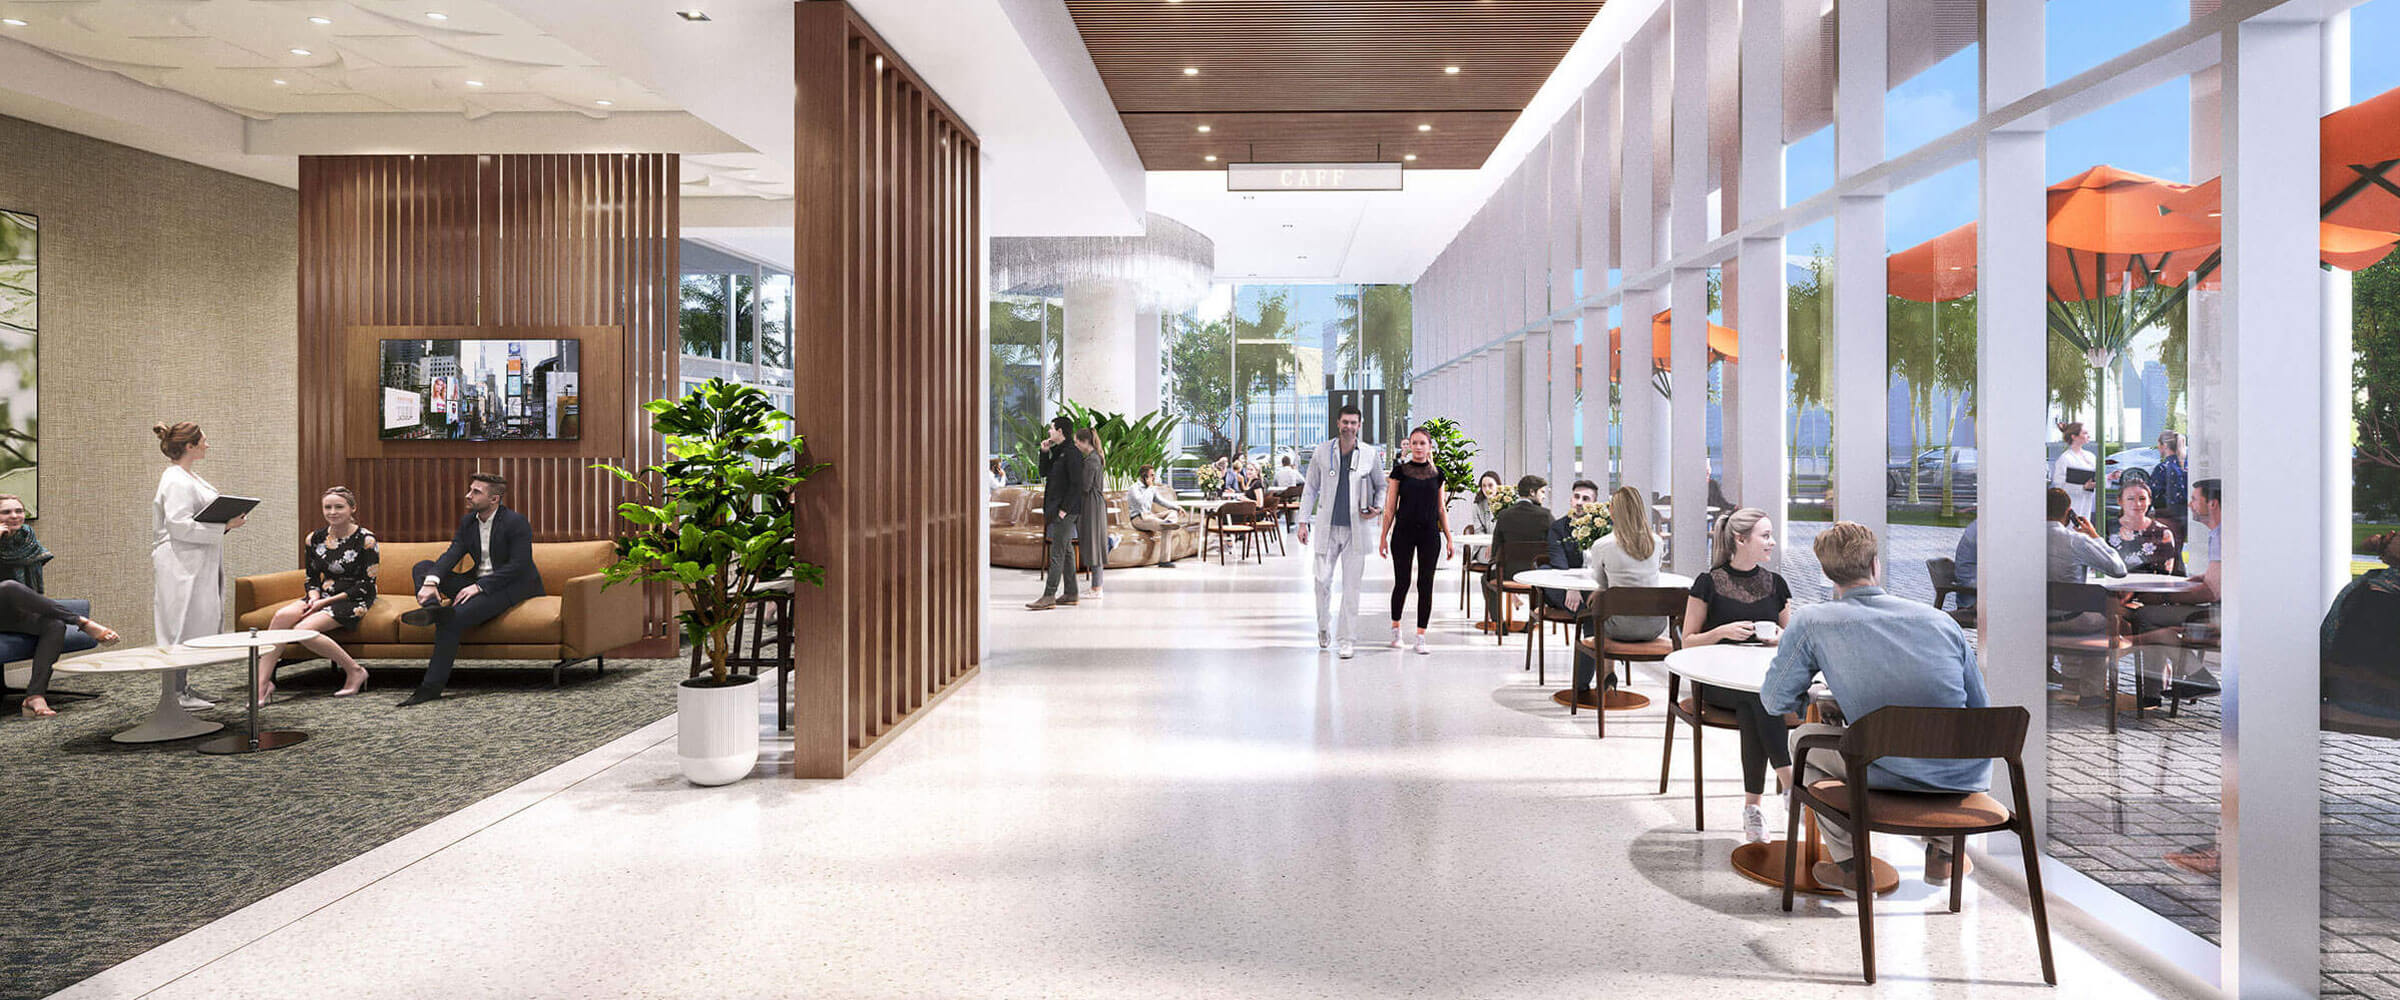 Cafe Architectural Rendering of UHealth at SoLé Mia in Aventura